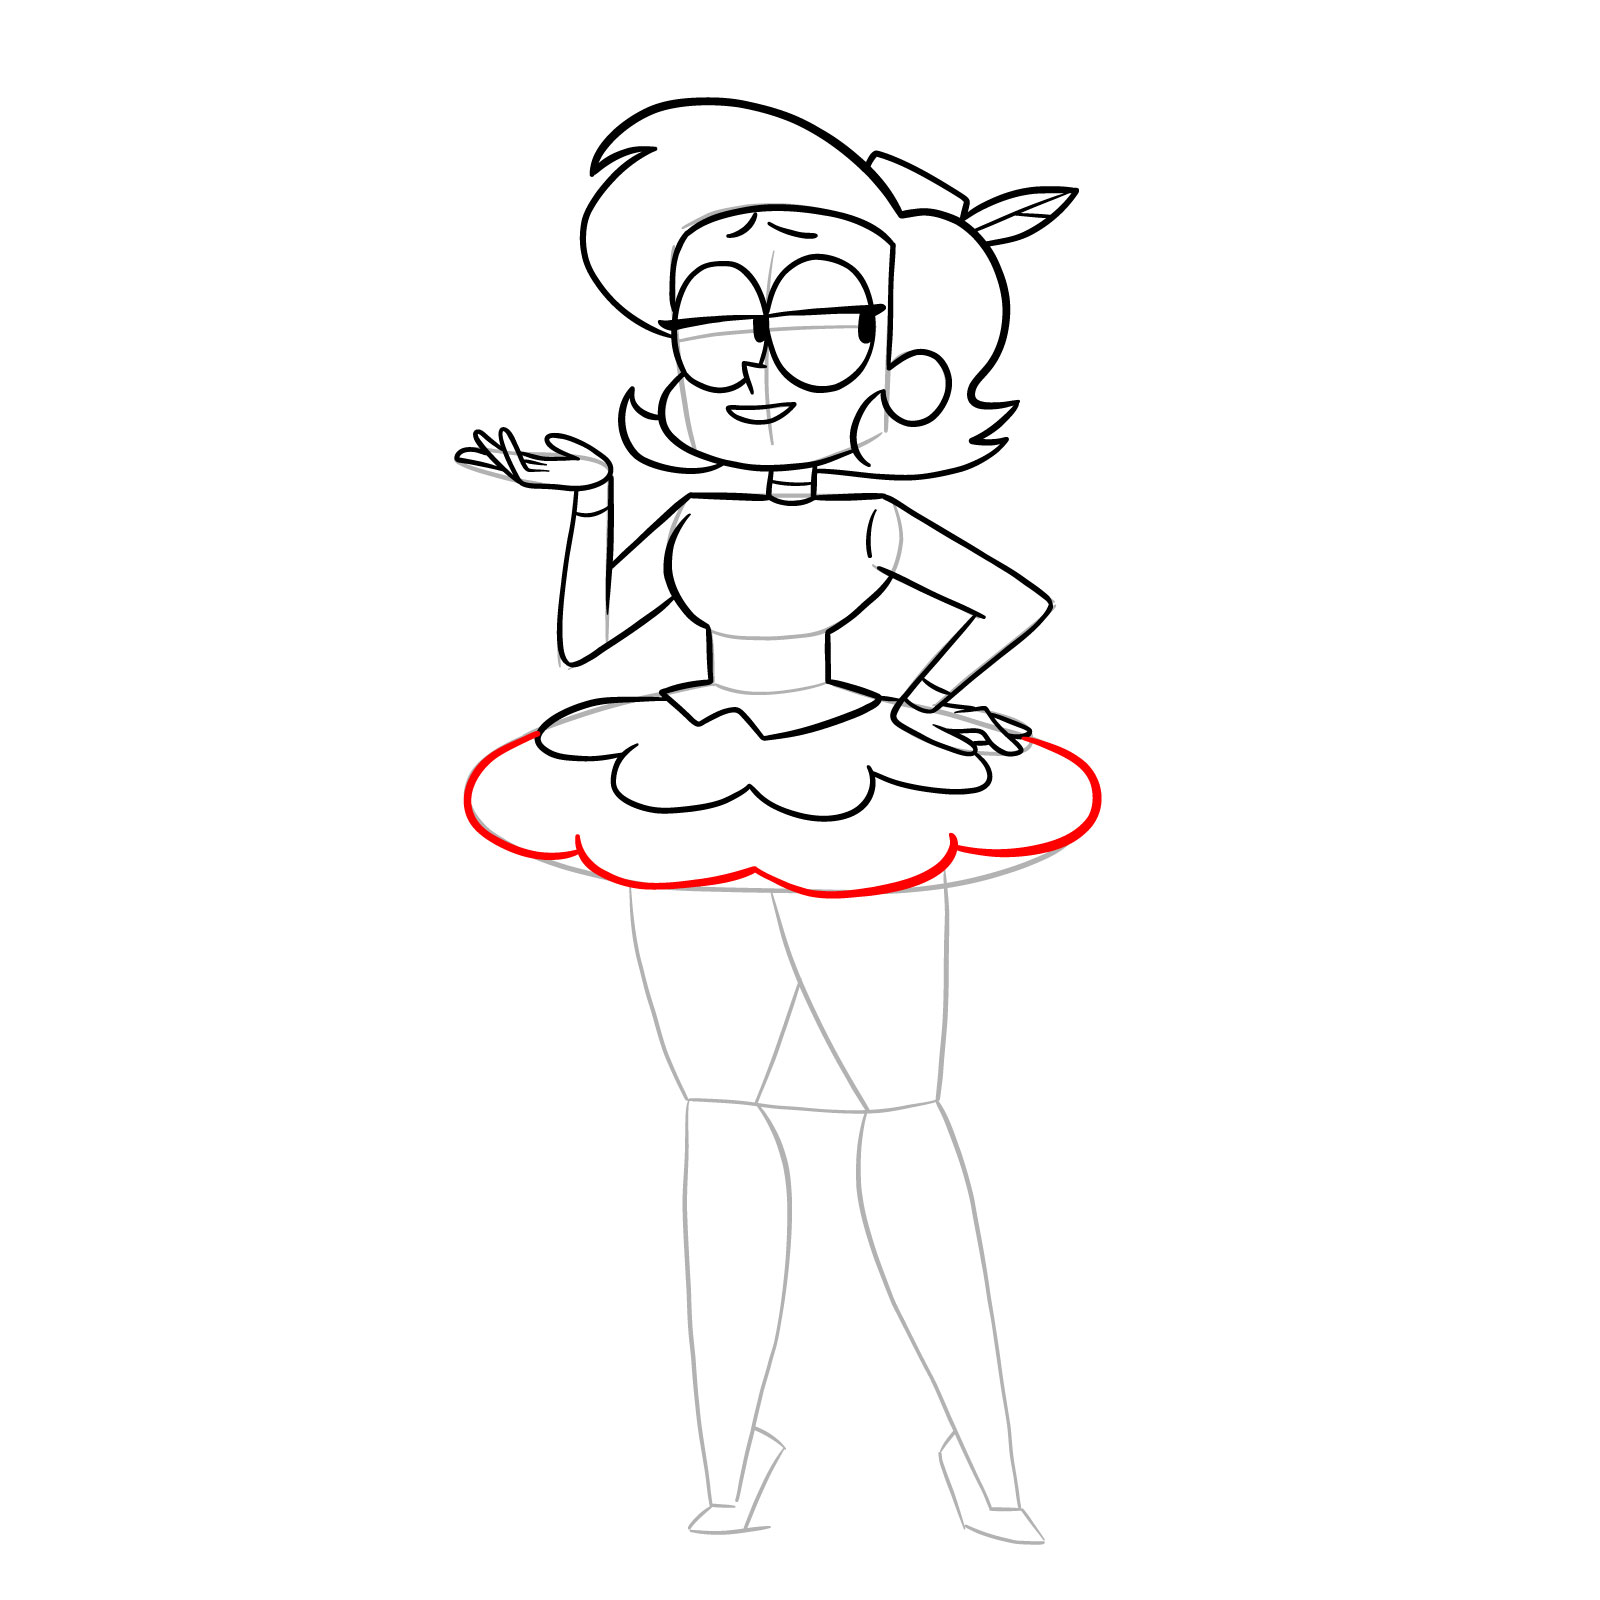 How to draw Elodie from OK K.O.! - step 27